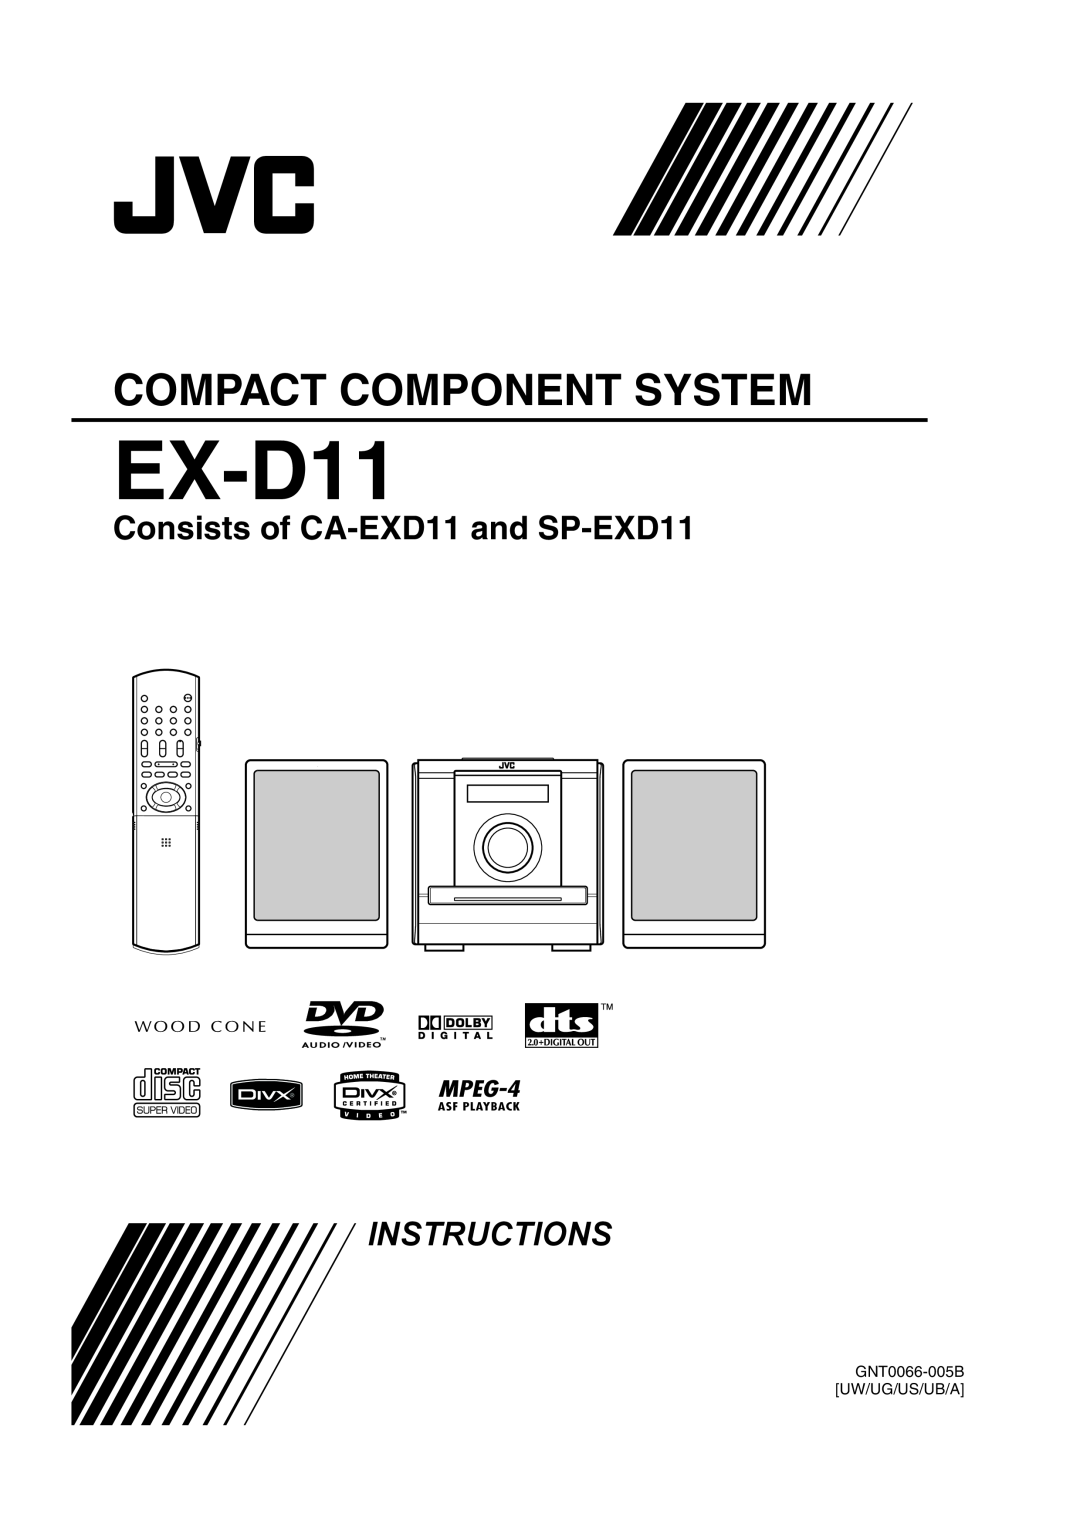 JVC GNT0066-001A manual EX-D11, Compact Component System, Consists of CA-EXD11and SP-EXD11, Instructions 